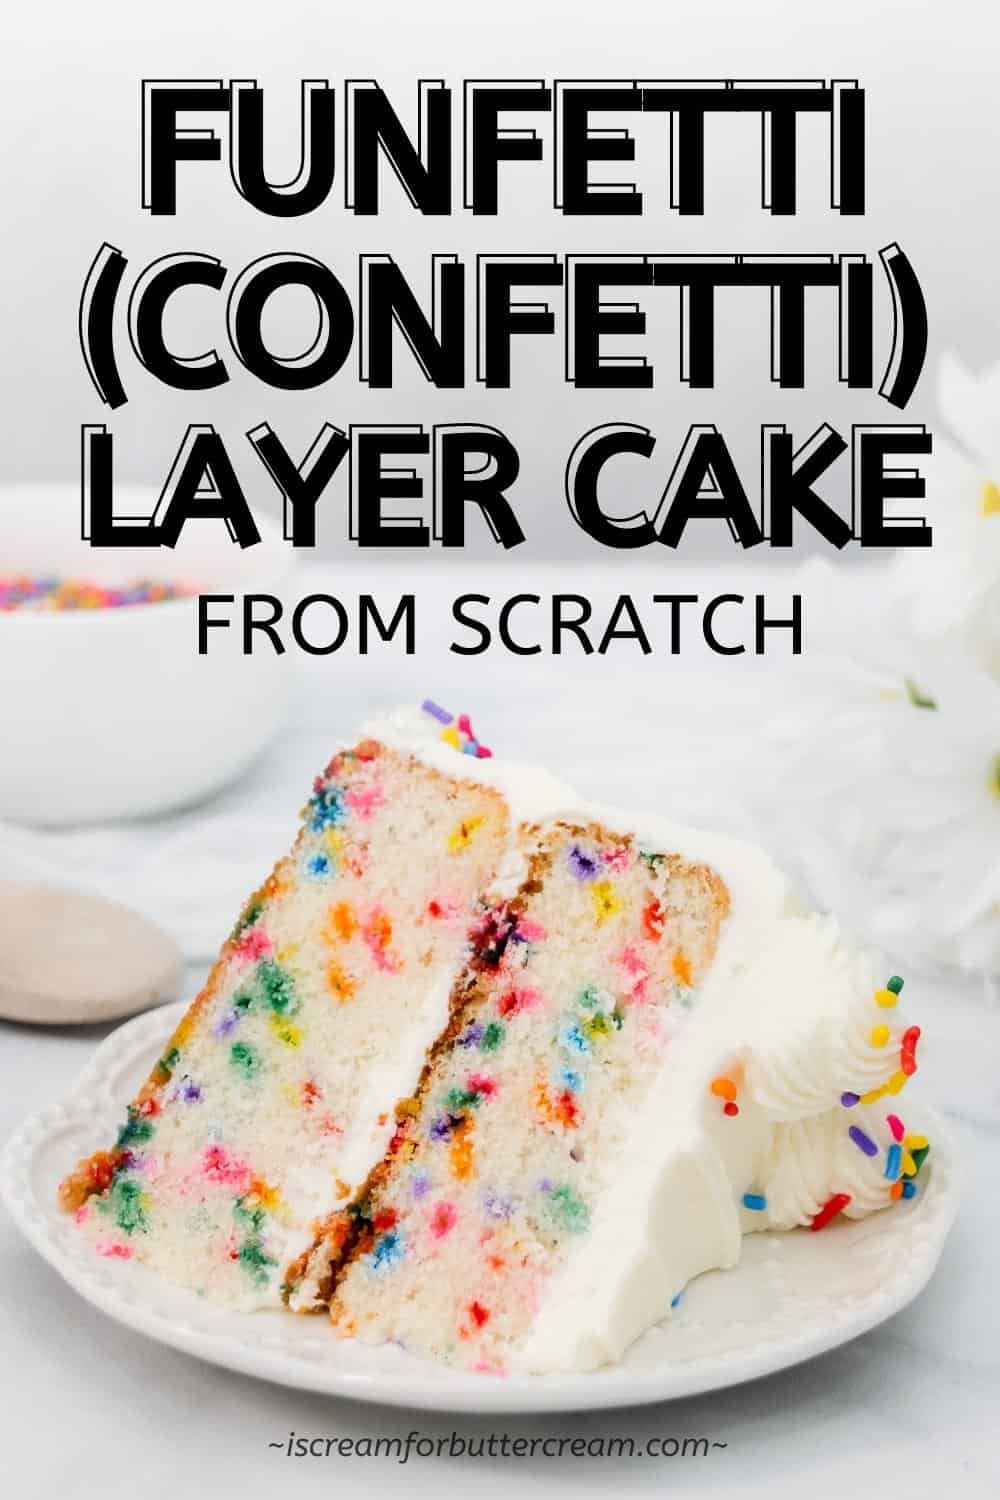 Slice of confetti cake on a white plate with text overlay pin 1.